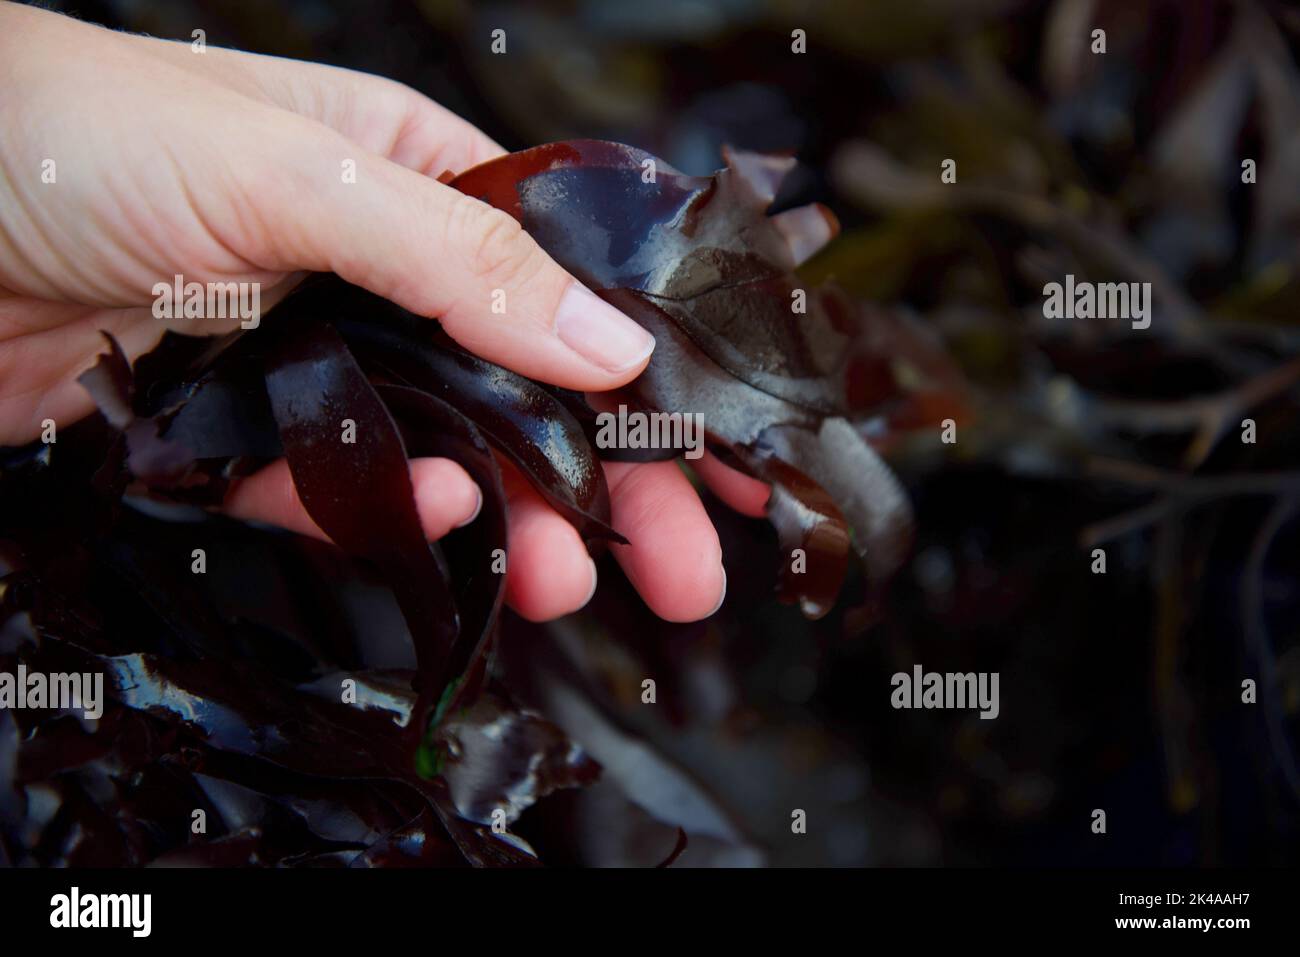 Dulse (palmaria palmata) being harvested by hand from rocky shore Stock Photo